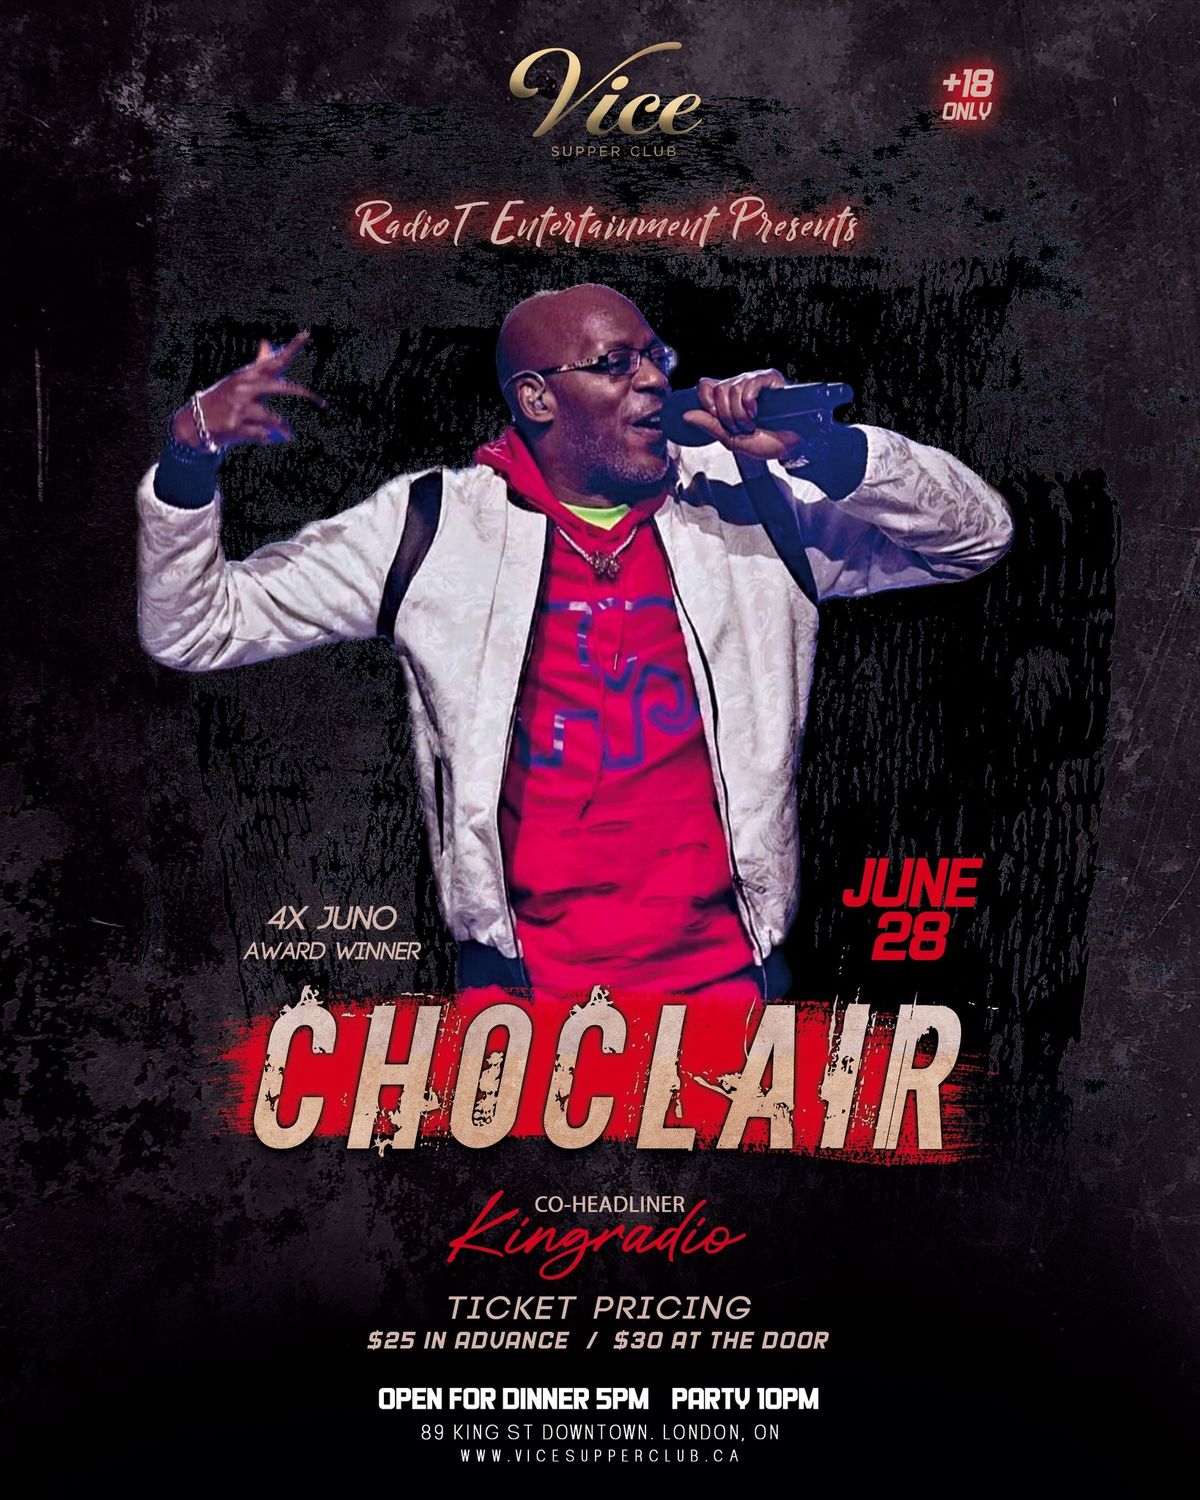 Choclair Live in London